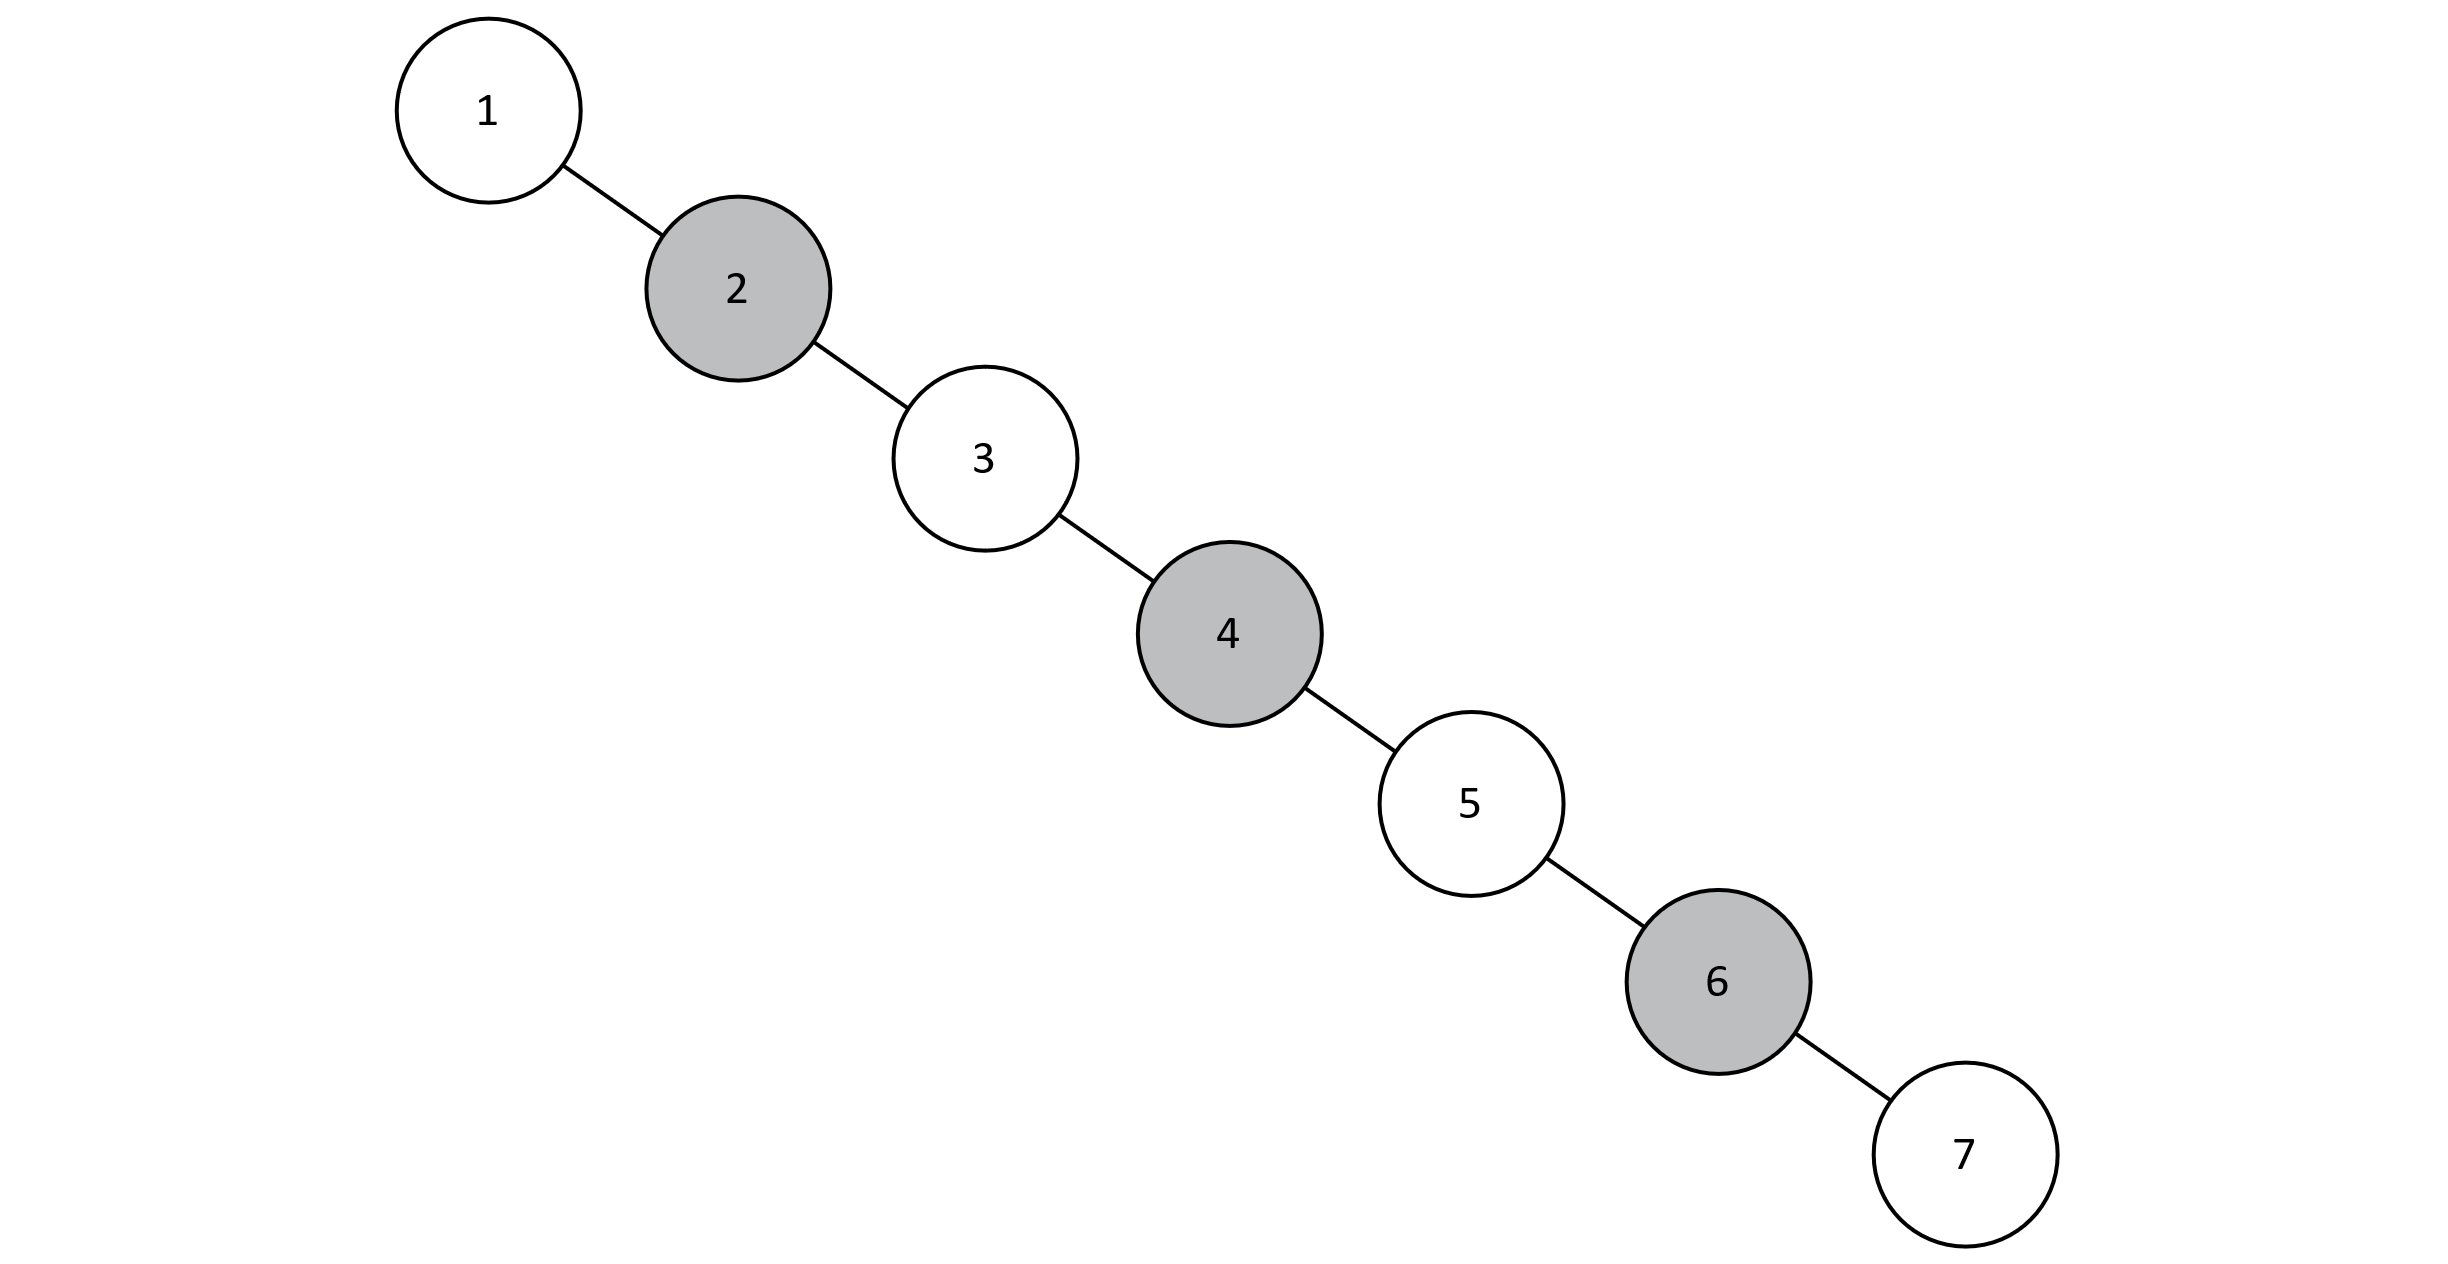 A binary search tree for which no node has a left child. This results in a structure that closely resembles a linked list.